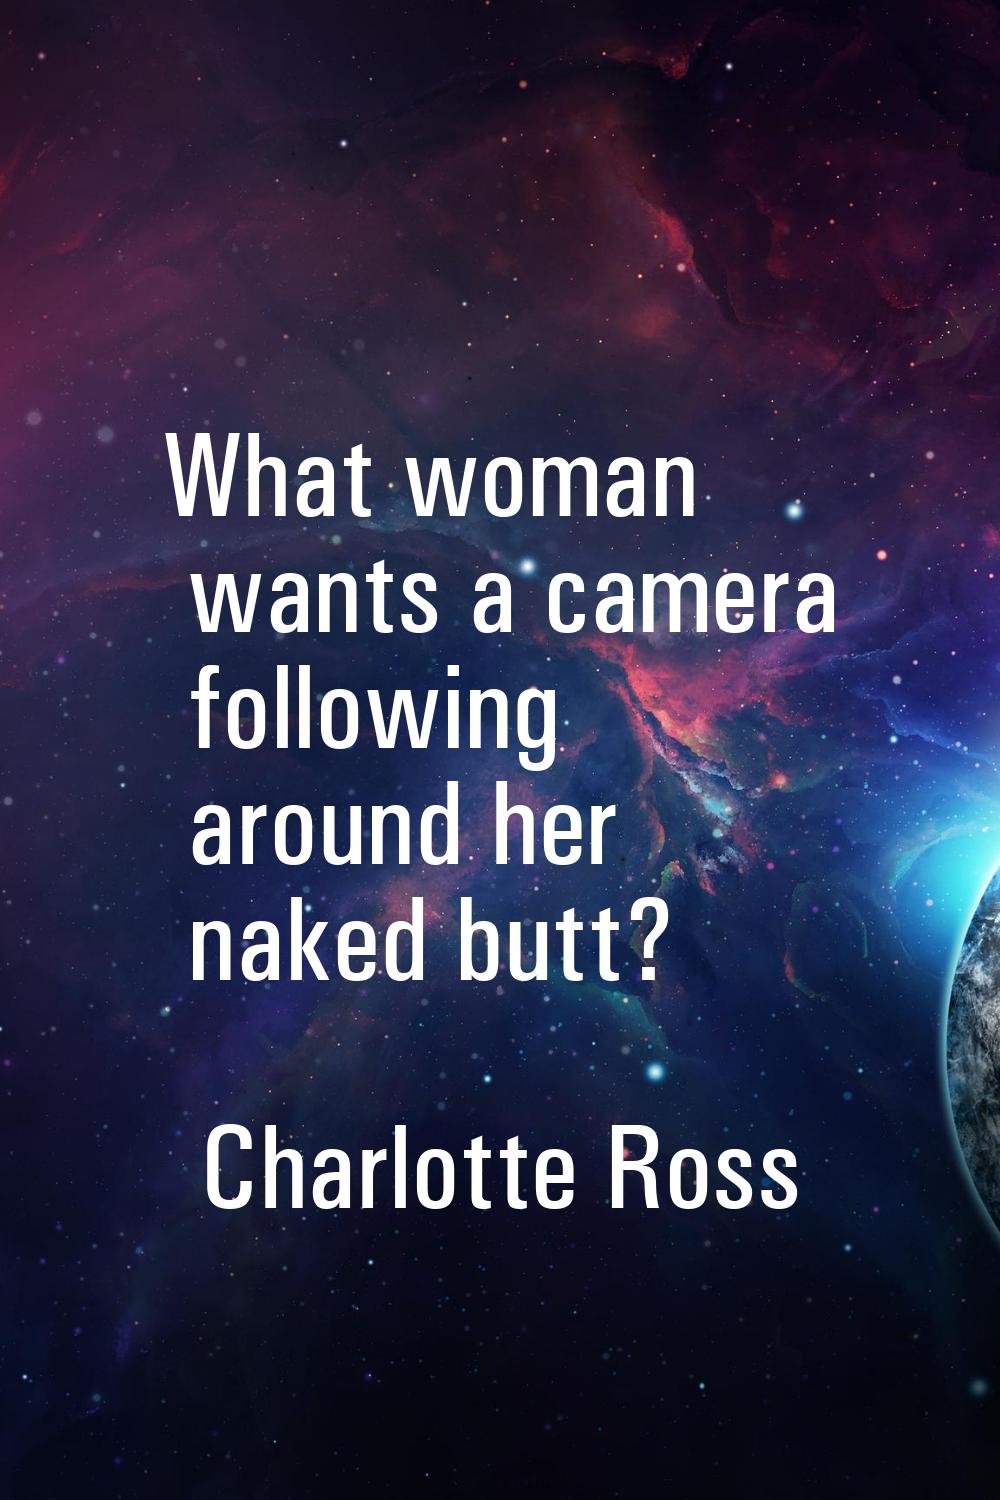 What woman wants a camera following around her naked butt?